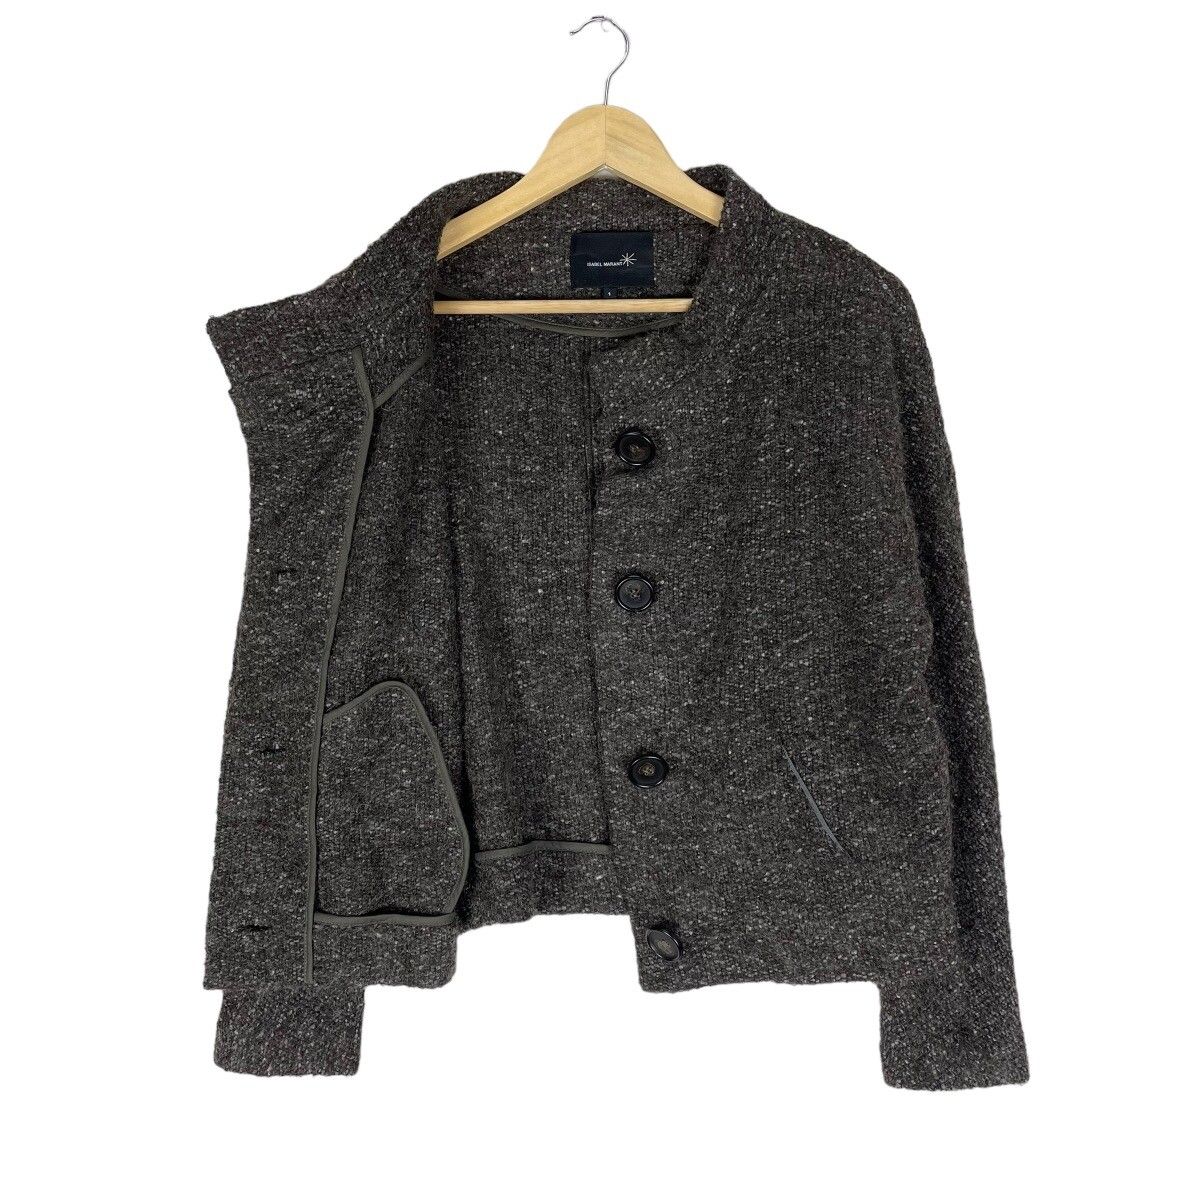 🌟ISABEL MARANT MOHAIR CROPPED BUTTON JACKET - 8